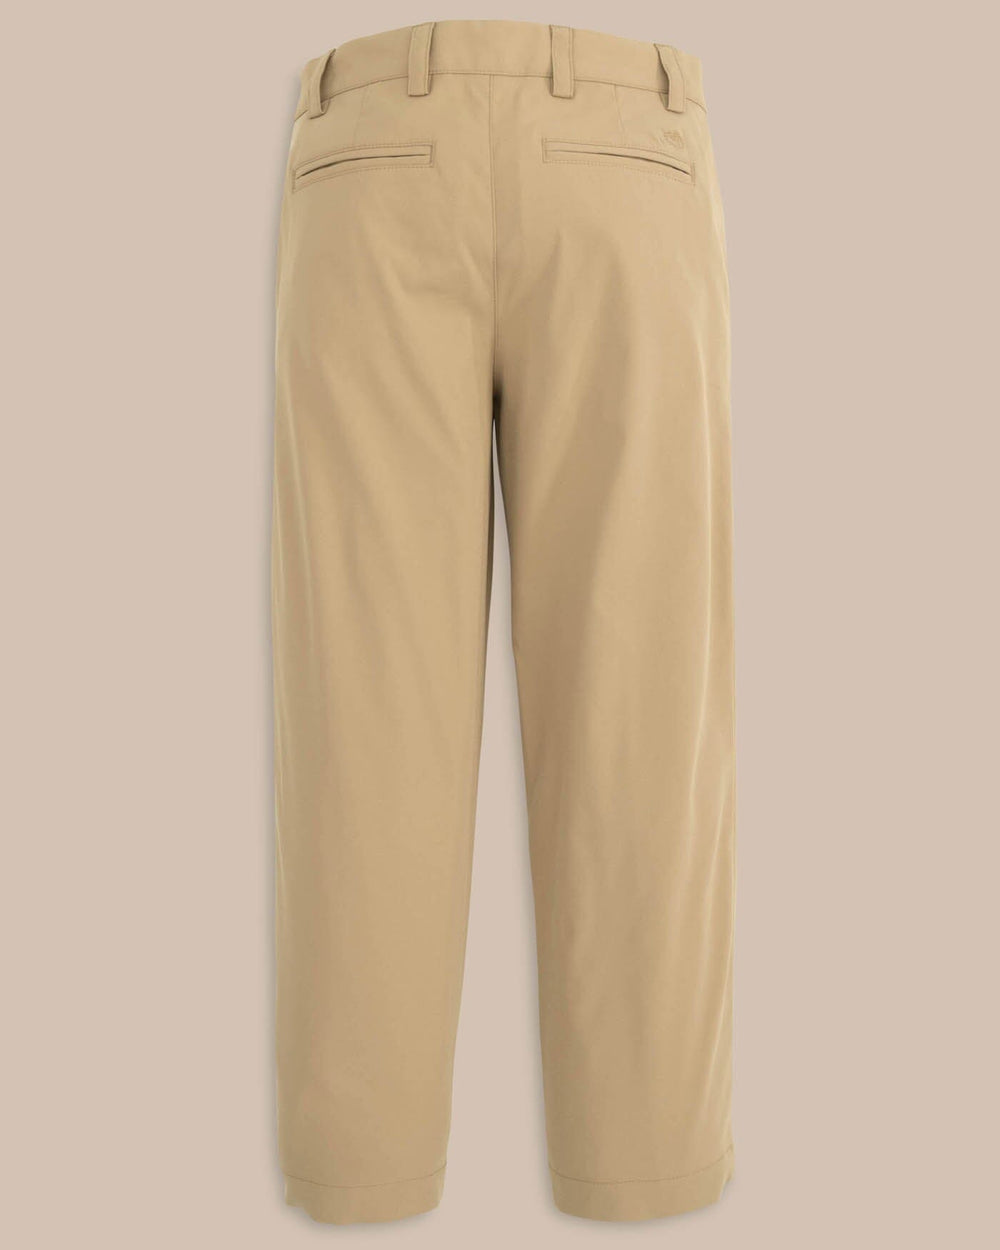 The back view of the Youth Leadhead Performance Pant by Southern Tide - Sandstone Khaki